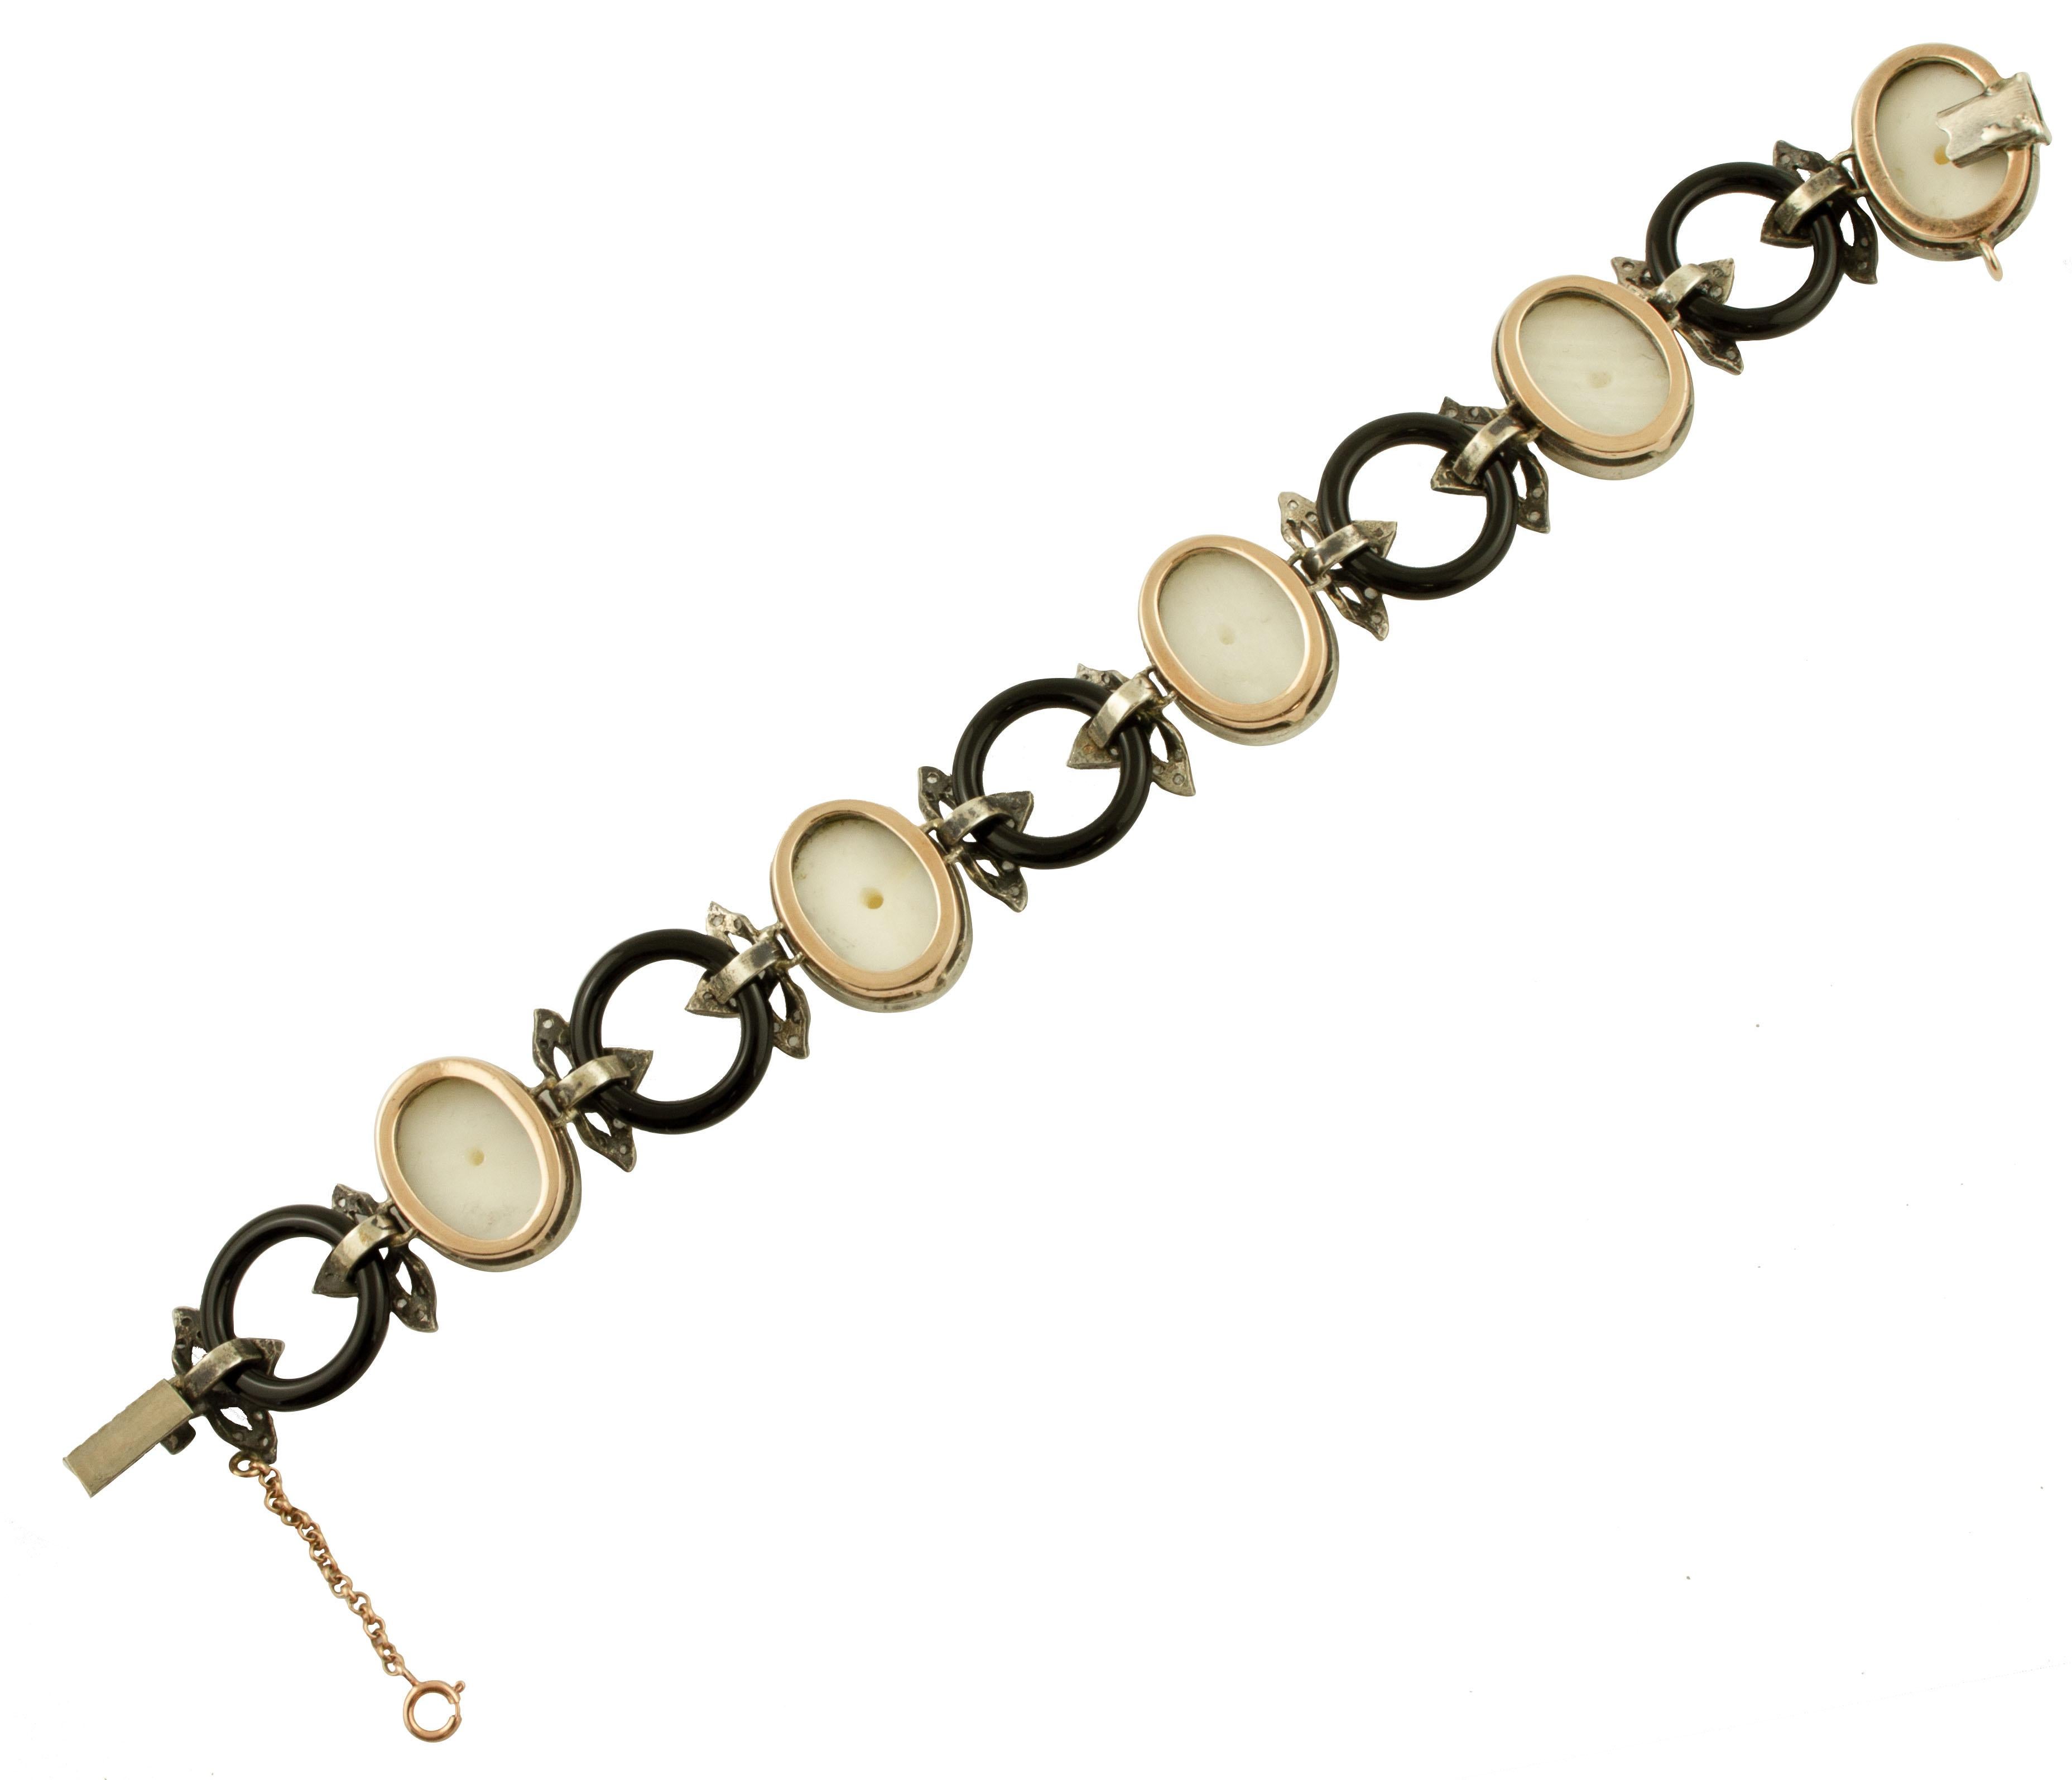 Diamonds, Onyx Rings, White Pearls 9 Karat Rose Gold and Silver Link Bracelet In Good Condition For Sale In Marcianise, Marcianise (CE)